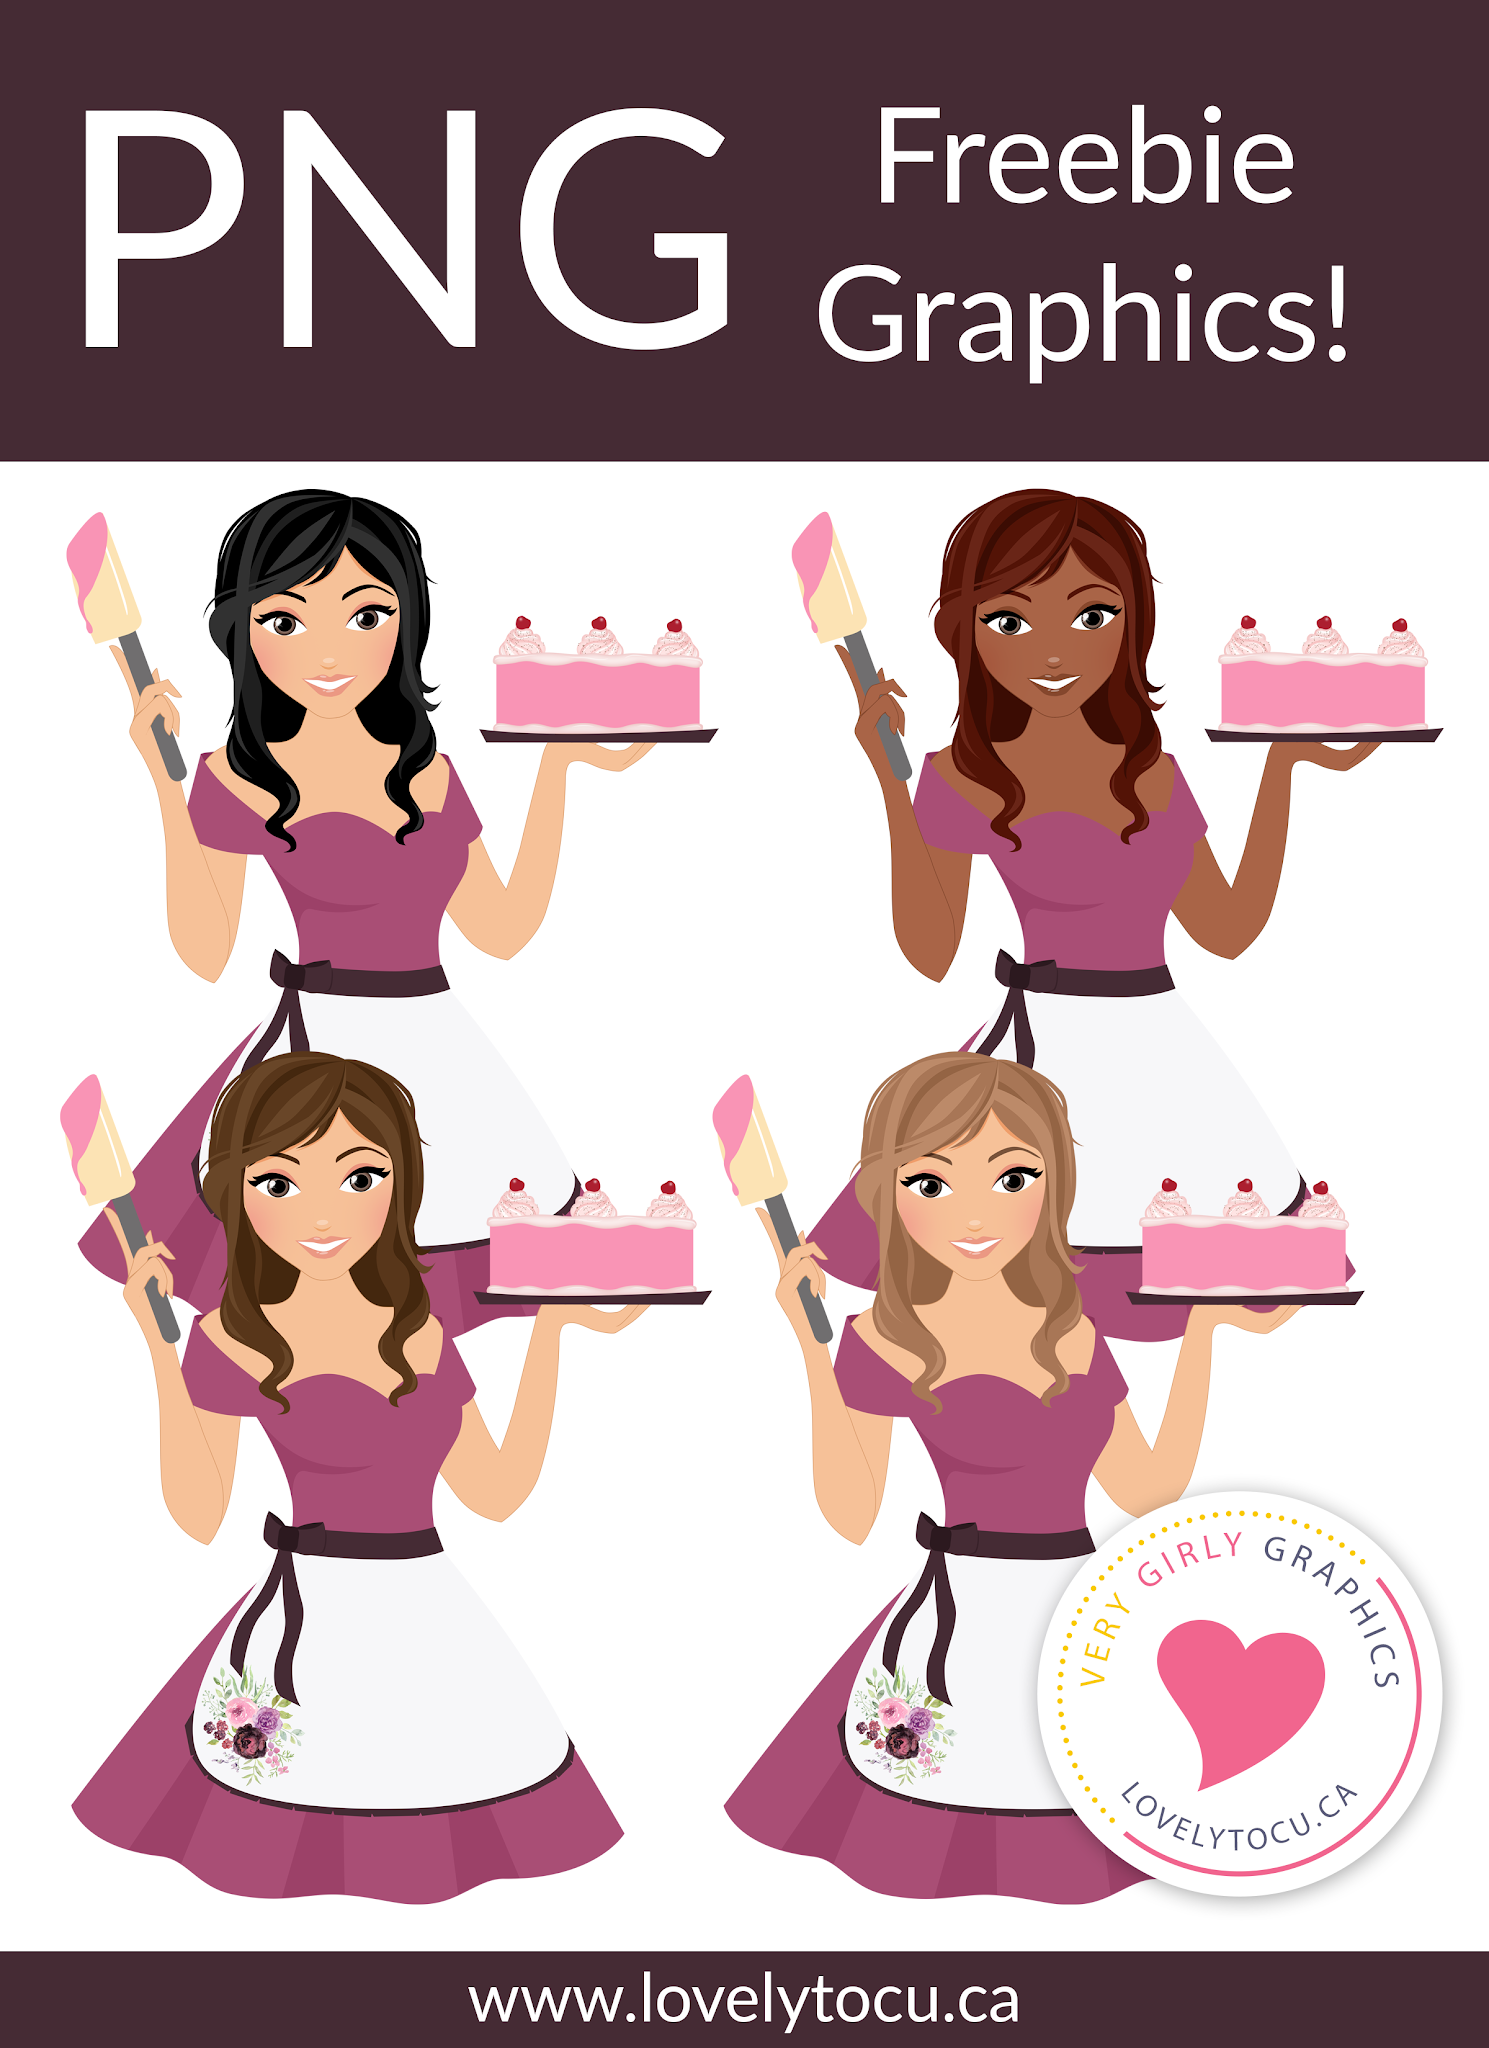 Cake baker woman freebie clipart graphic from Lovelytocu